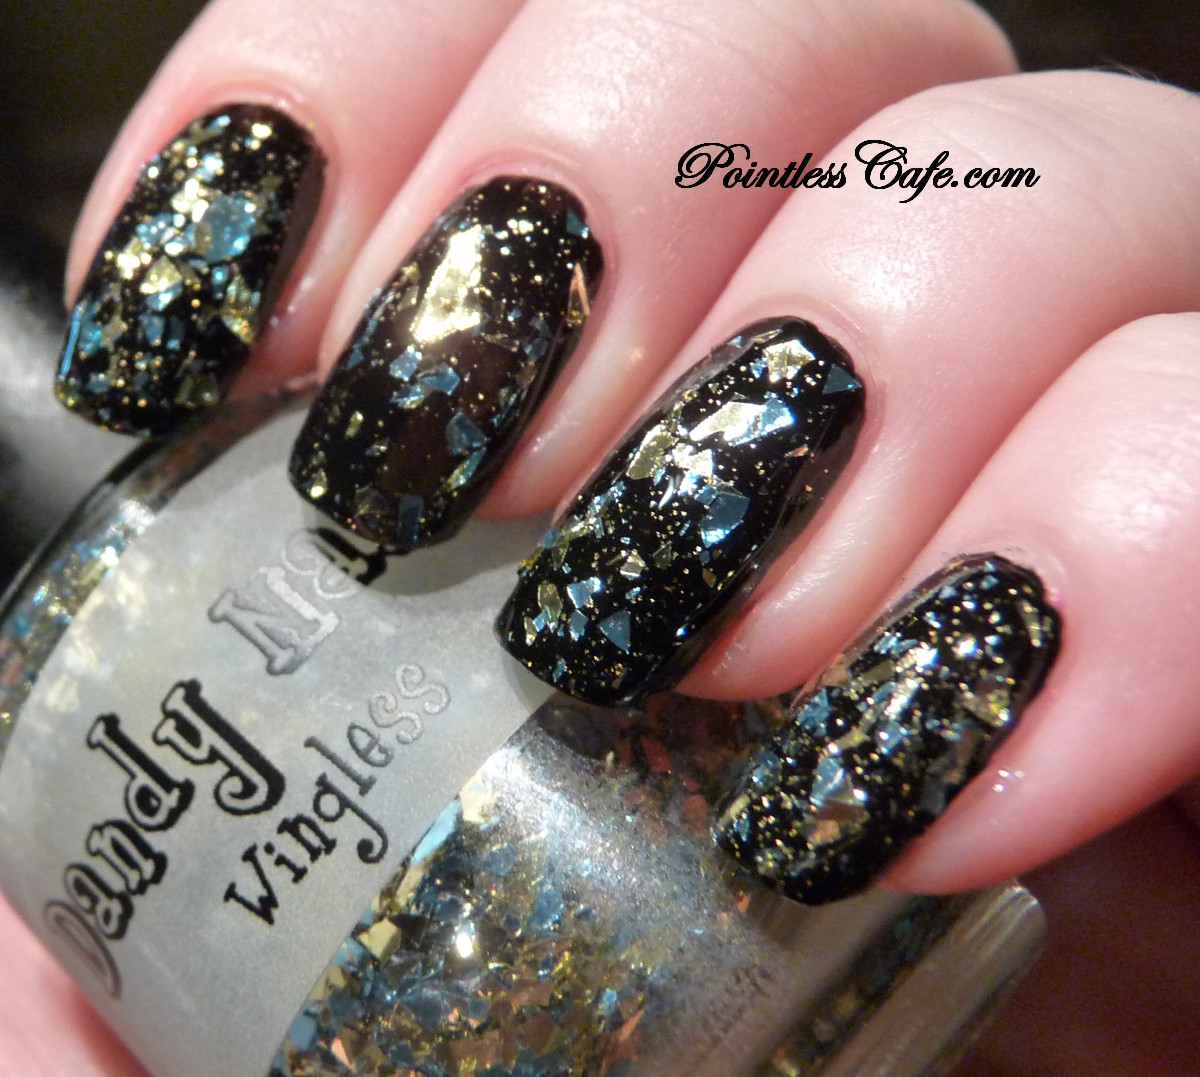 Dandy Nails Wingless - Swatches and Review | Pointless Cafe